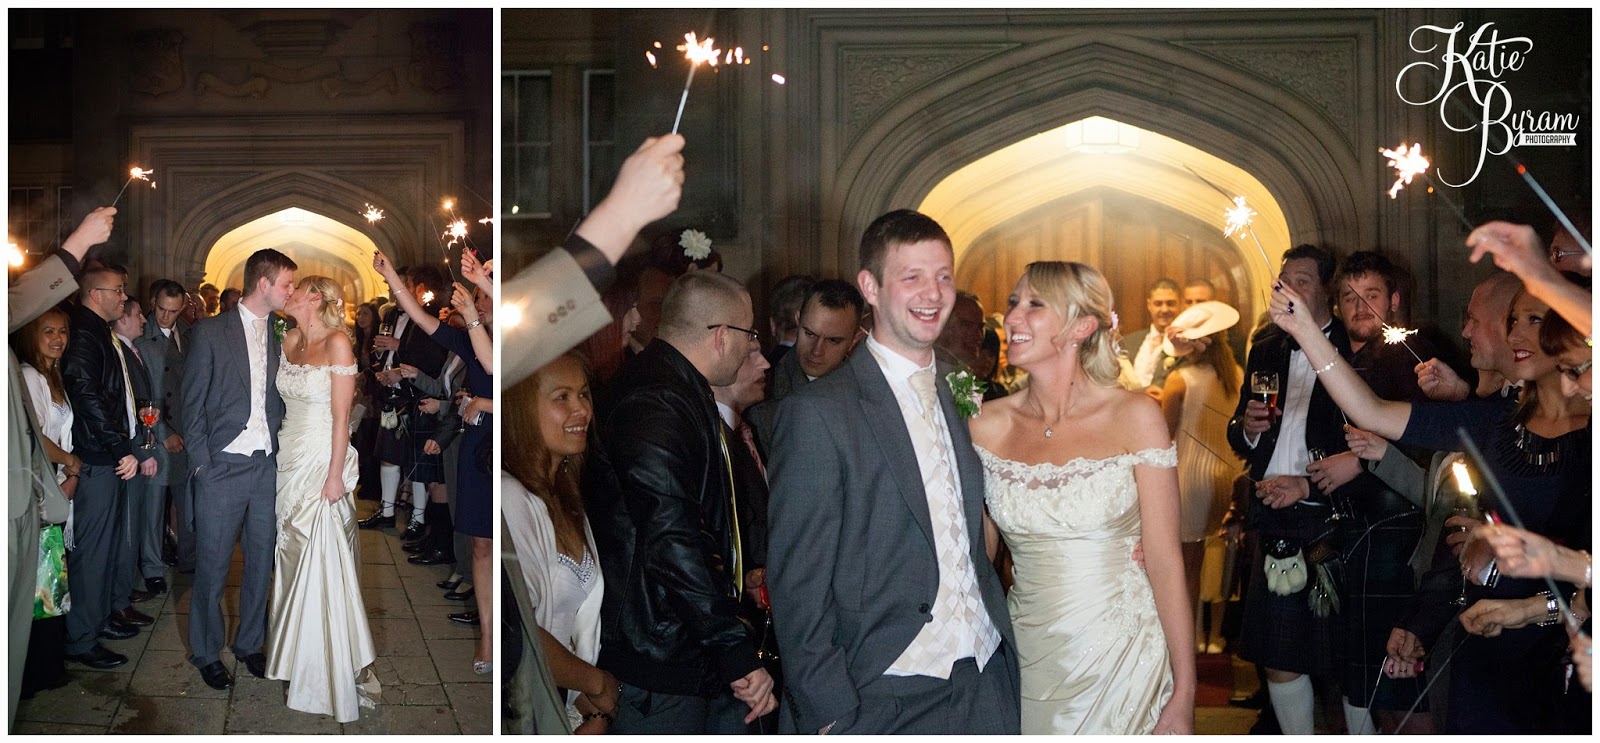 wedding sparklers, sparkler send off, matfen hall wedding, matfen wedding, northumberland wedding, katie byram photography, vintage wedding, quirky wedding photography, north east wedding, north east wedding venue, great hall matfen, event diva, by wendy, just perfect,